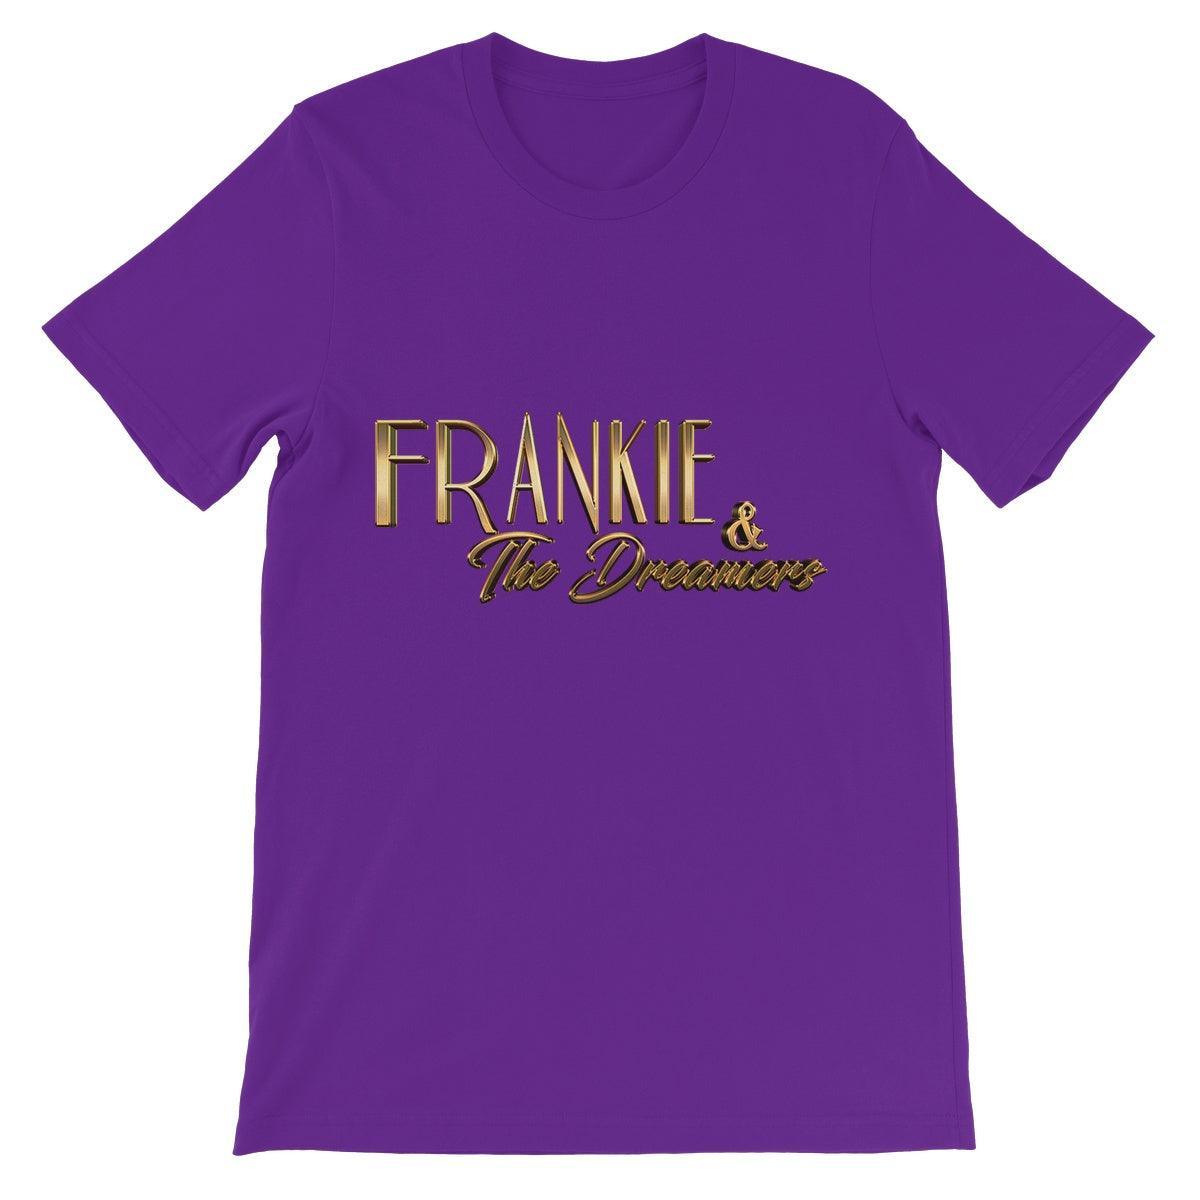 Frankie And The Dreamers Unisex Short Sleeve T-Shirt | Apparel Team Purple